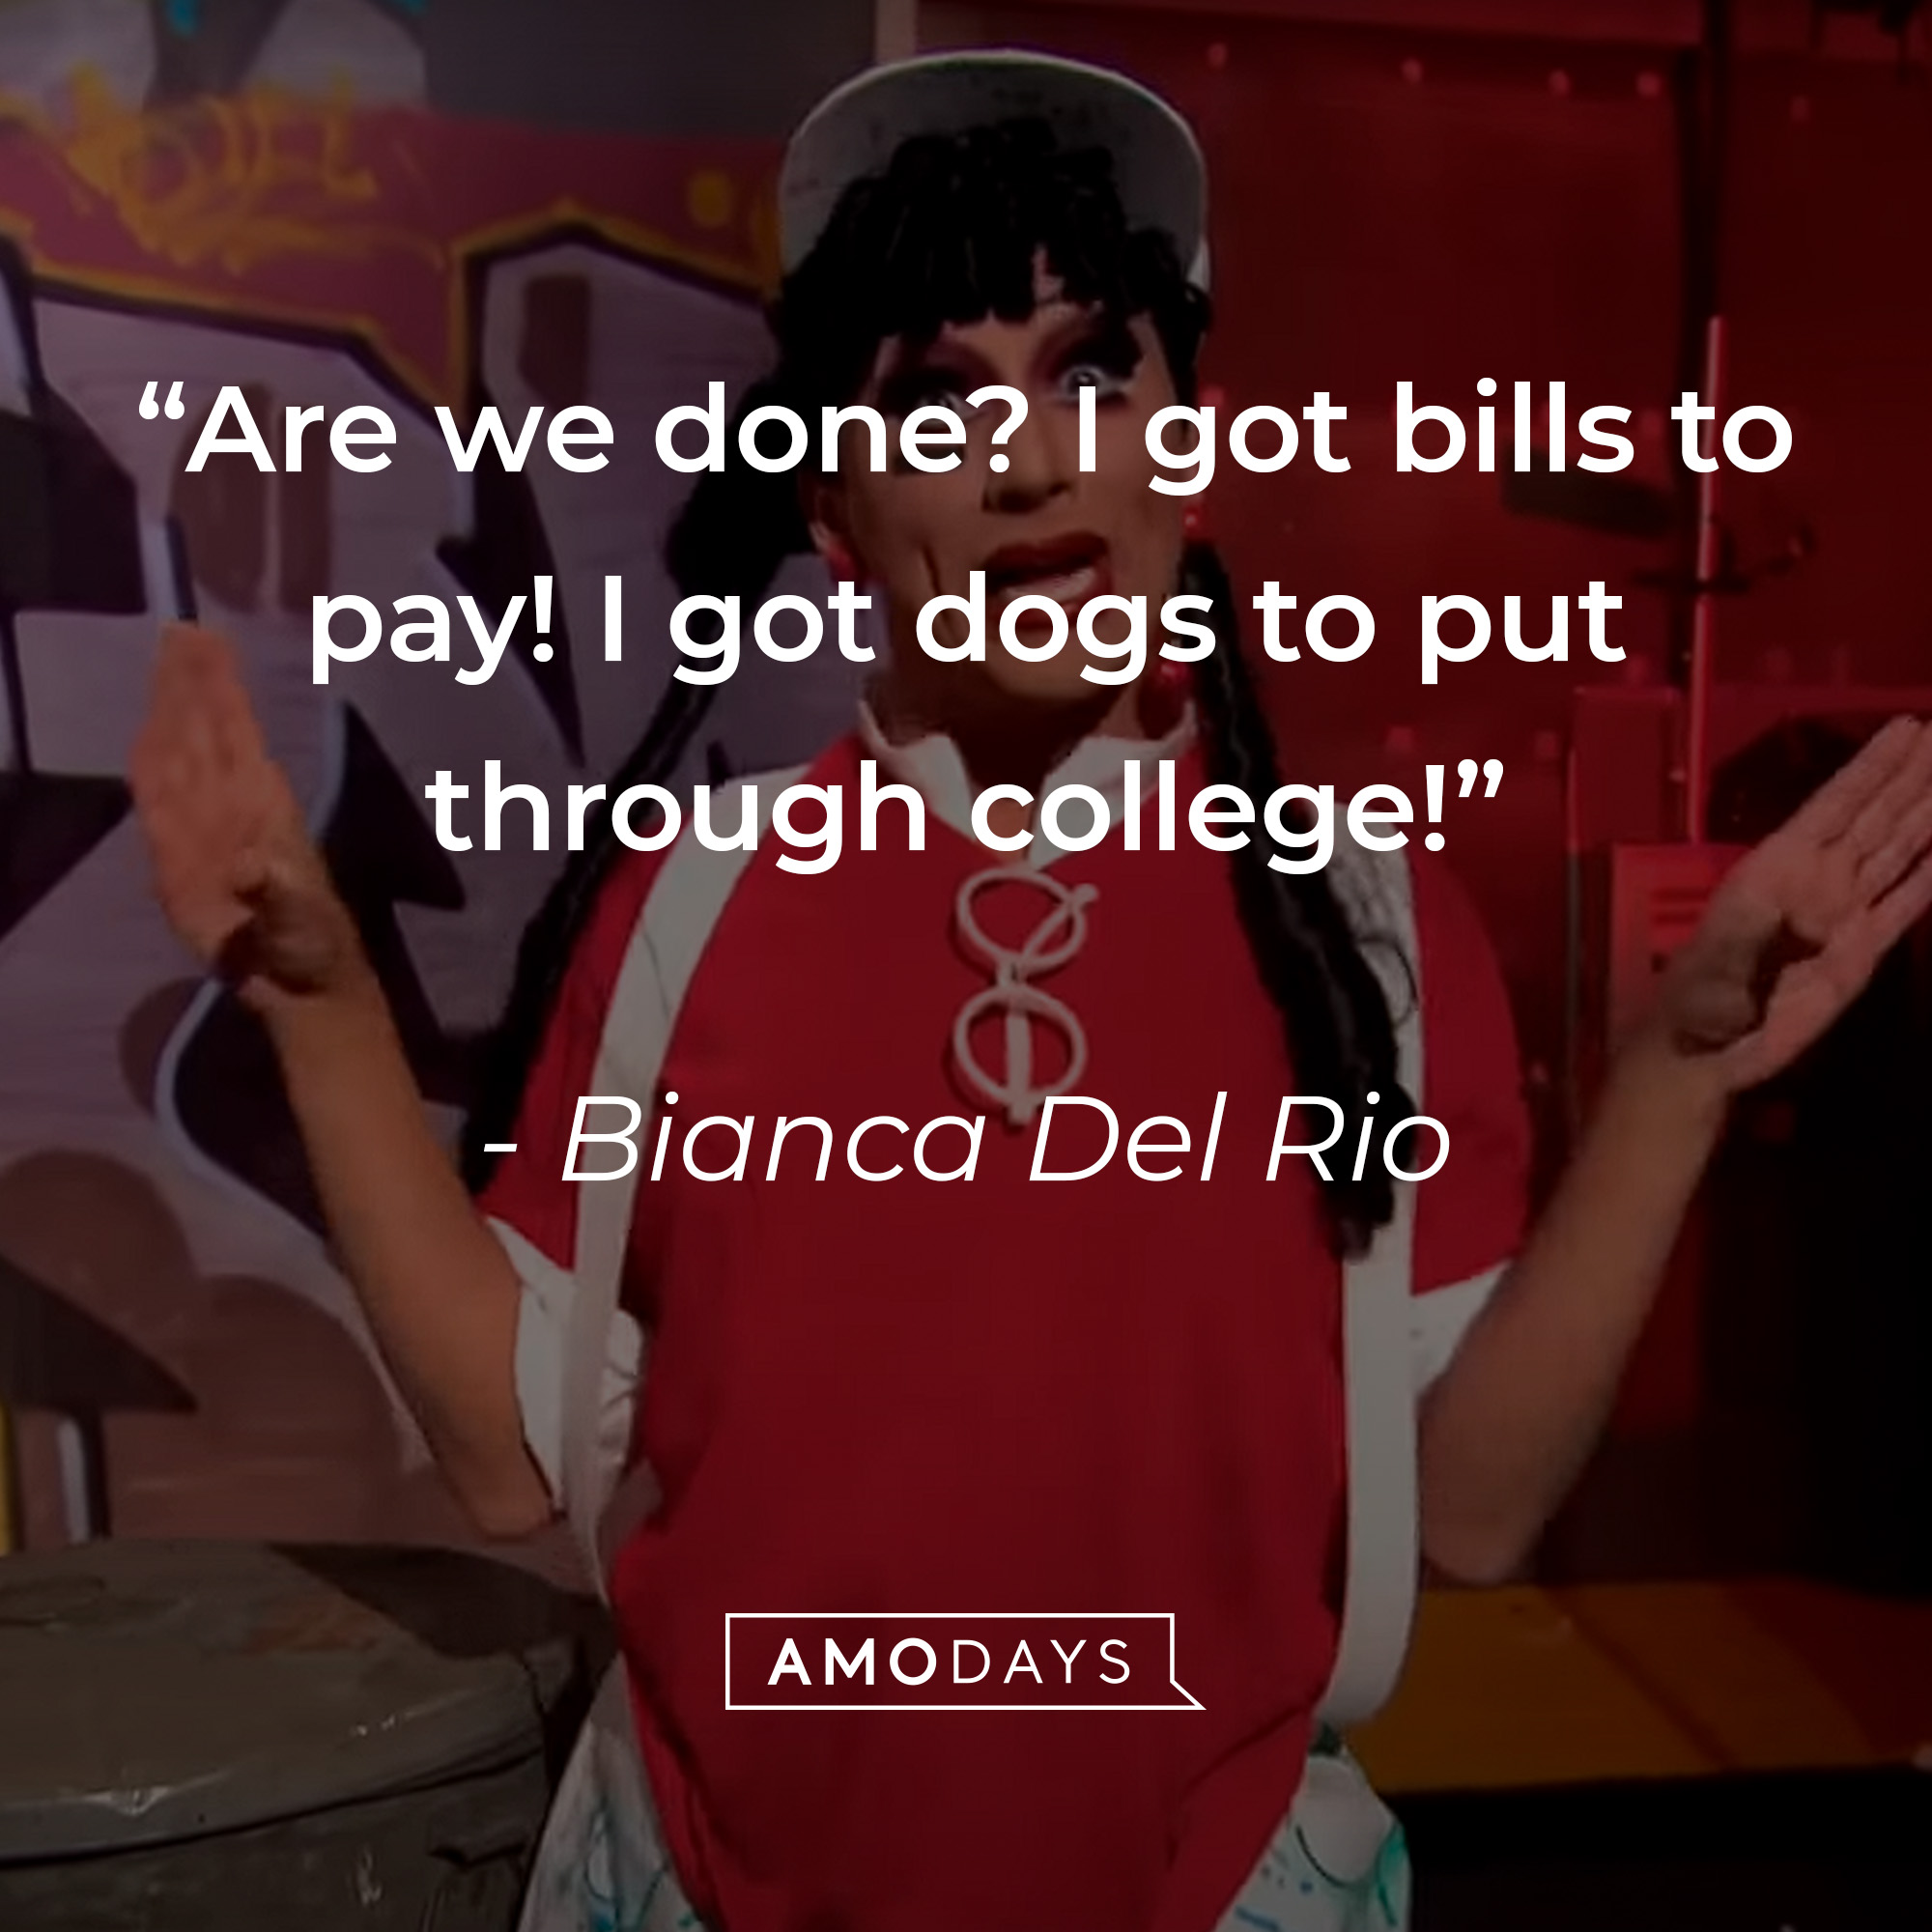 Bianca Del Rio's quote: “Are we done? I got bills to pay! I got dogs to put through college!” | Source: youtube.com/rupaulsdragrace